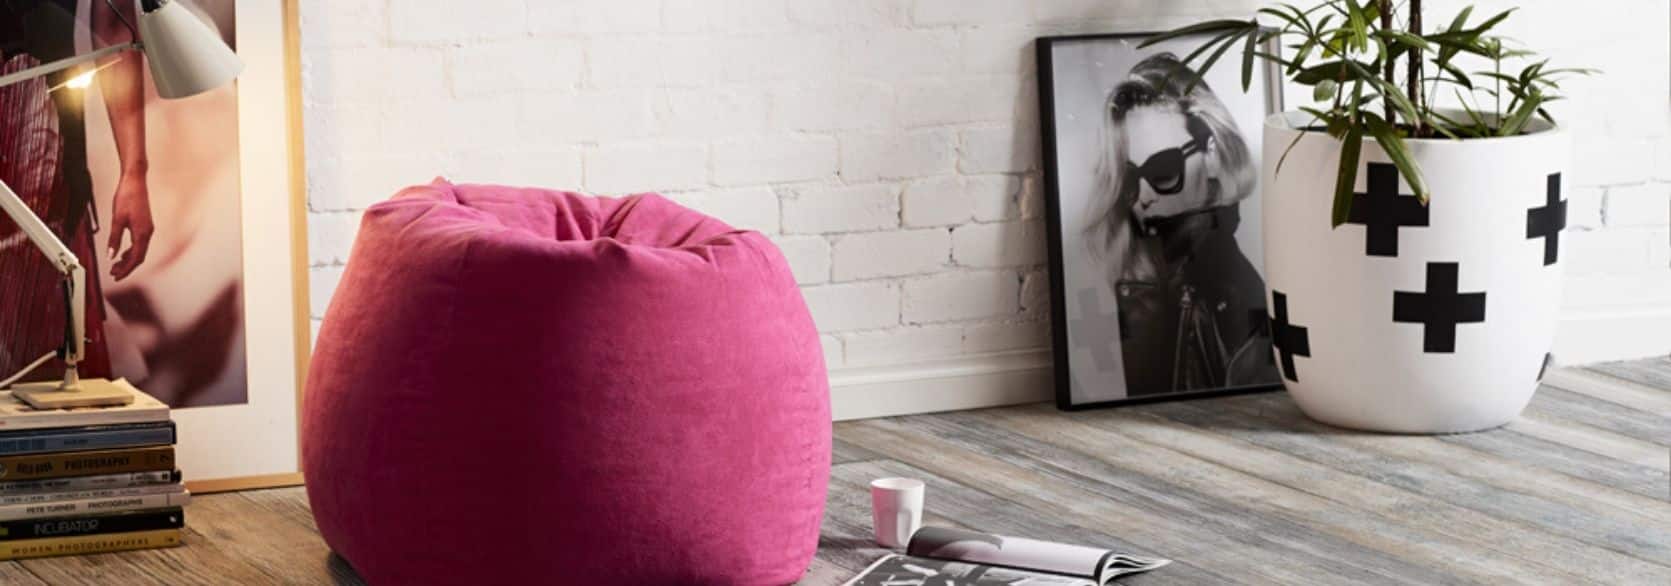 pink bean bag on floor next to coffee cup and magazine